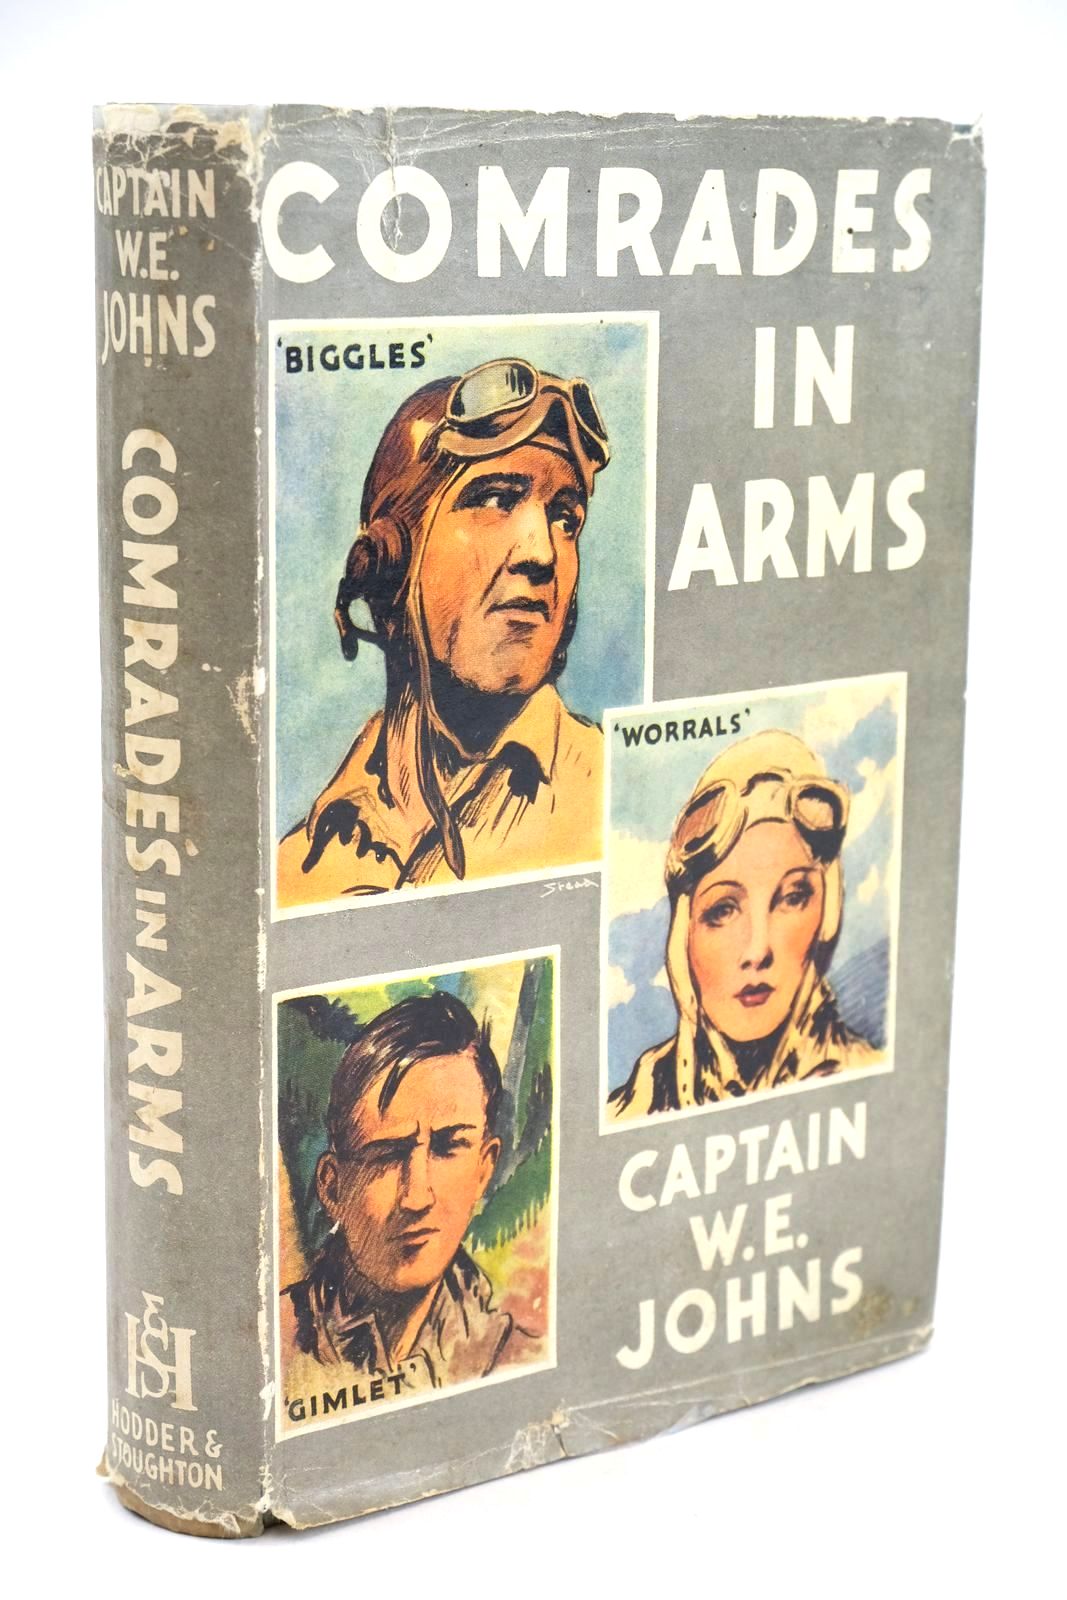 Photo of COMRADES IN ARMS written by Johns, W.E. illustrated by Stead, Leslie published by Hodder & Stoughton (STOCK CODE: 1324497)  for sale by Stella & Rose's Books